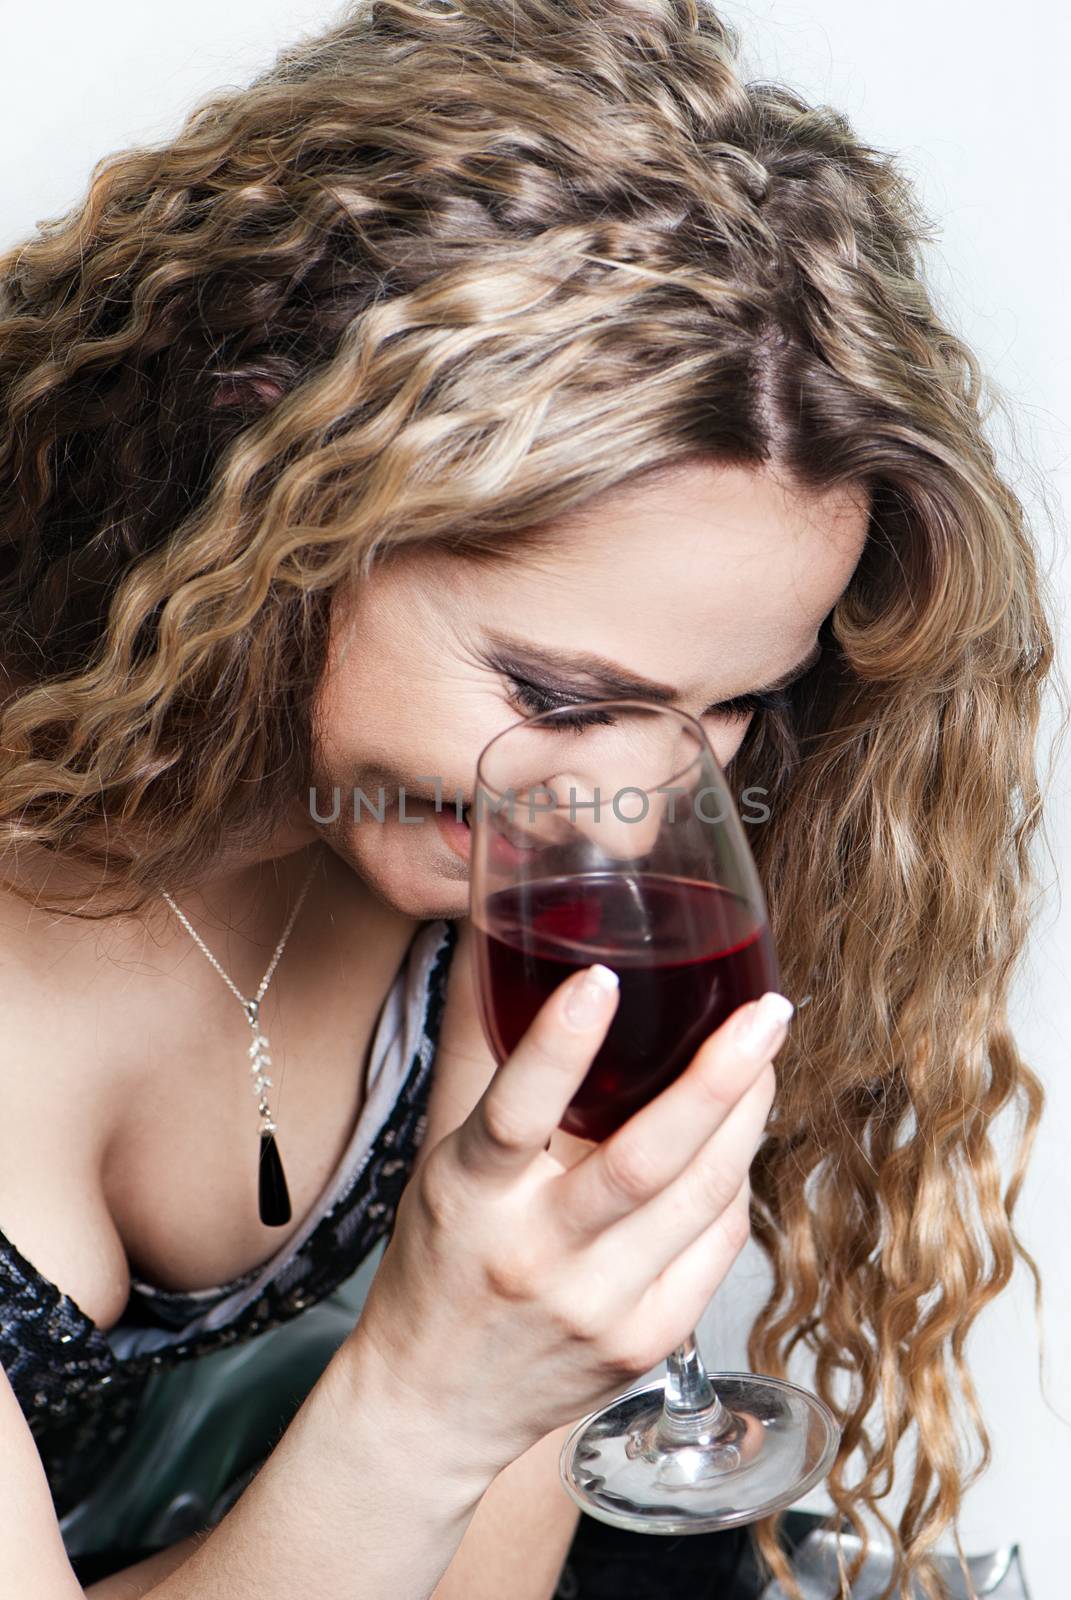 Isolated portrait shot of a beautiful caucasian woman with a red wine glass.